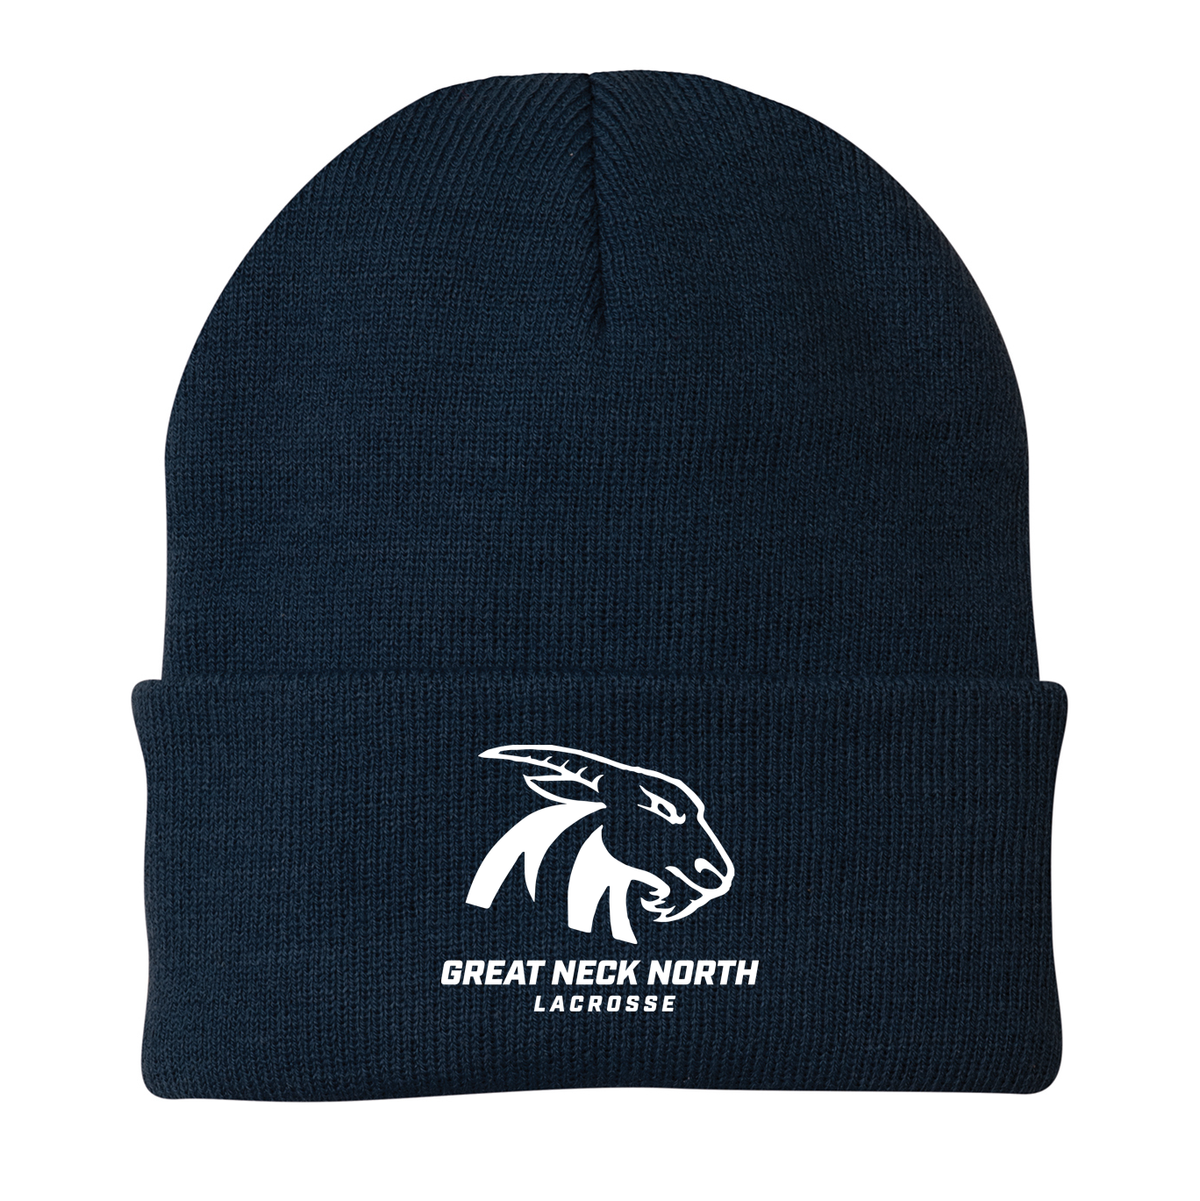 Great Neck North HS Lacrosse Knit Beanie